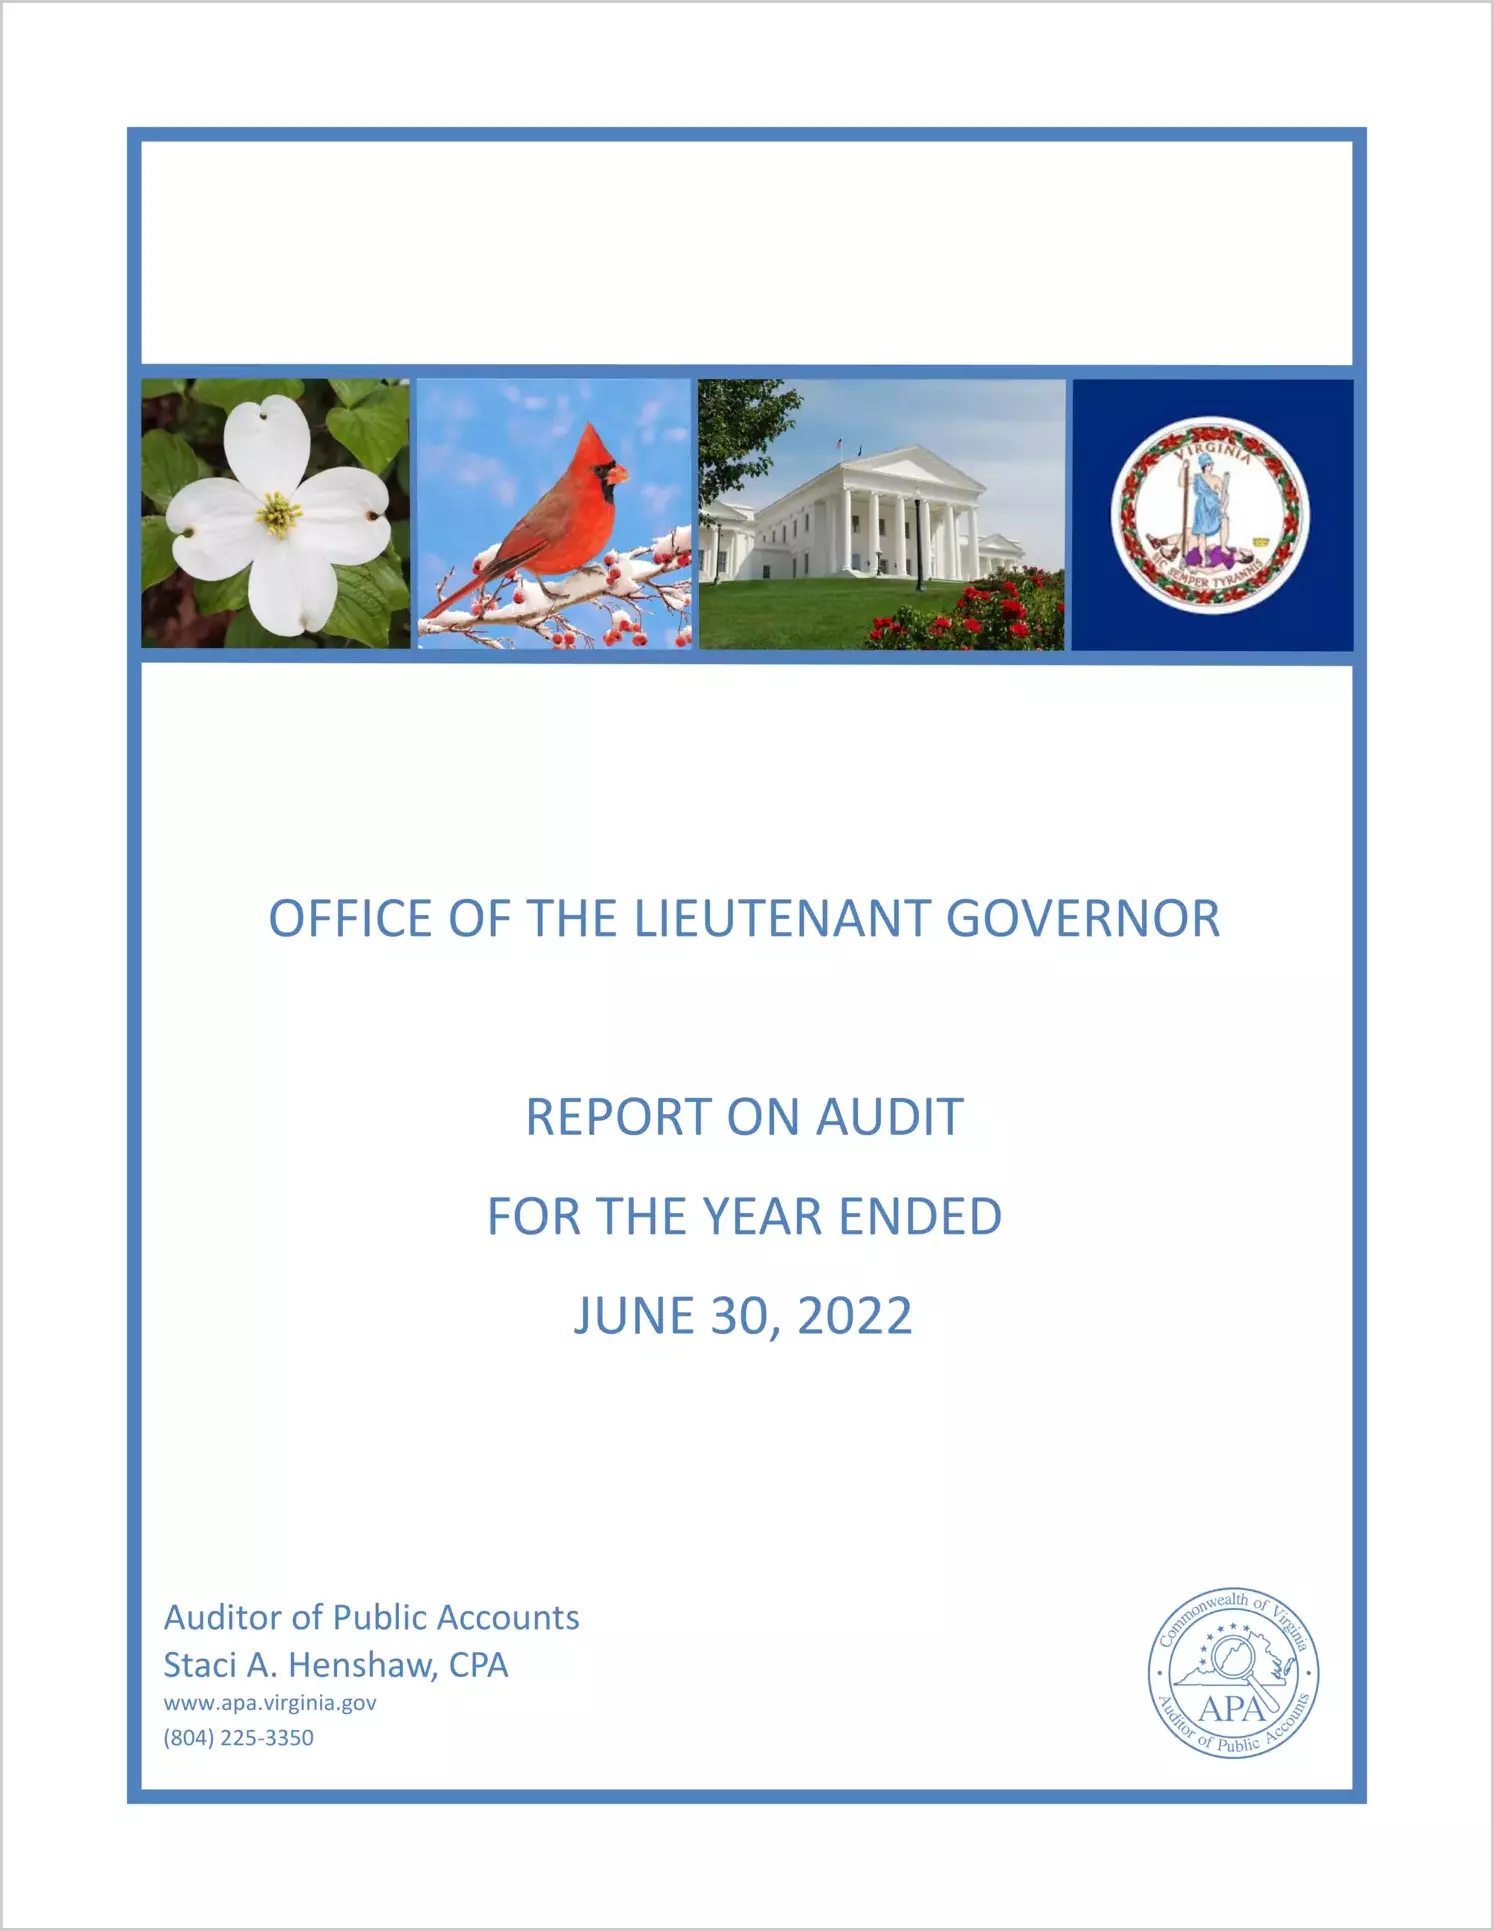 Office of the Lieutenant Governor for the year ended June 30, 2022